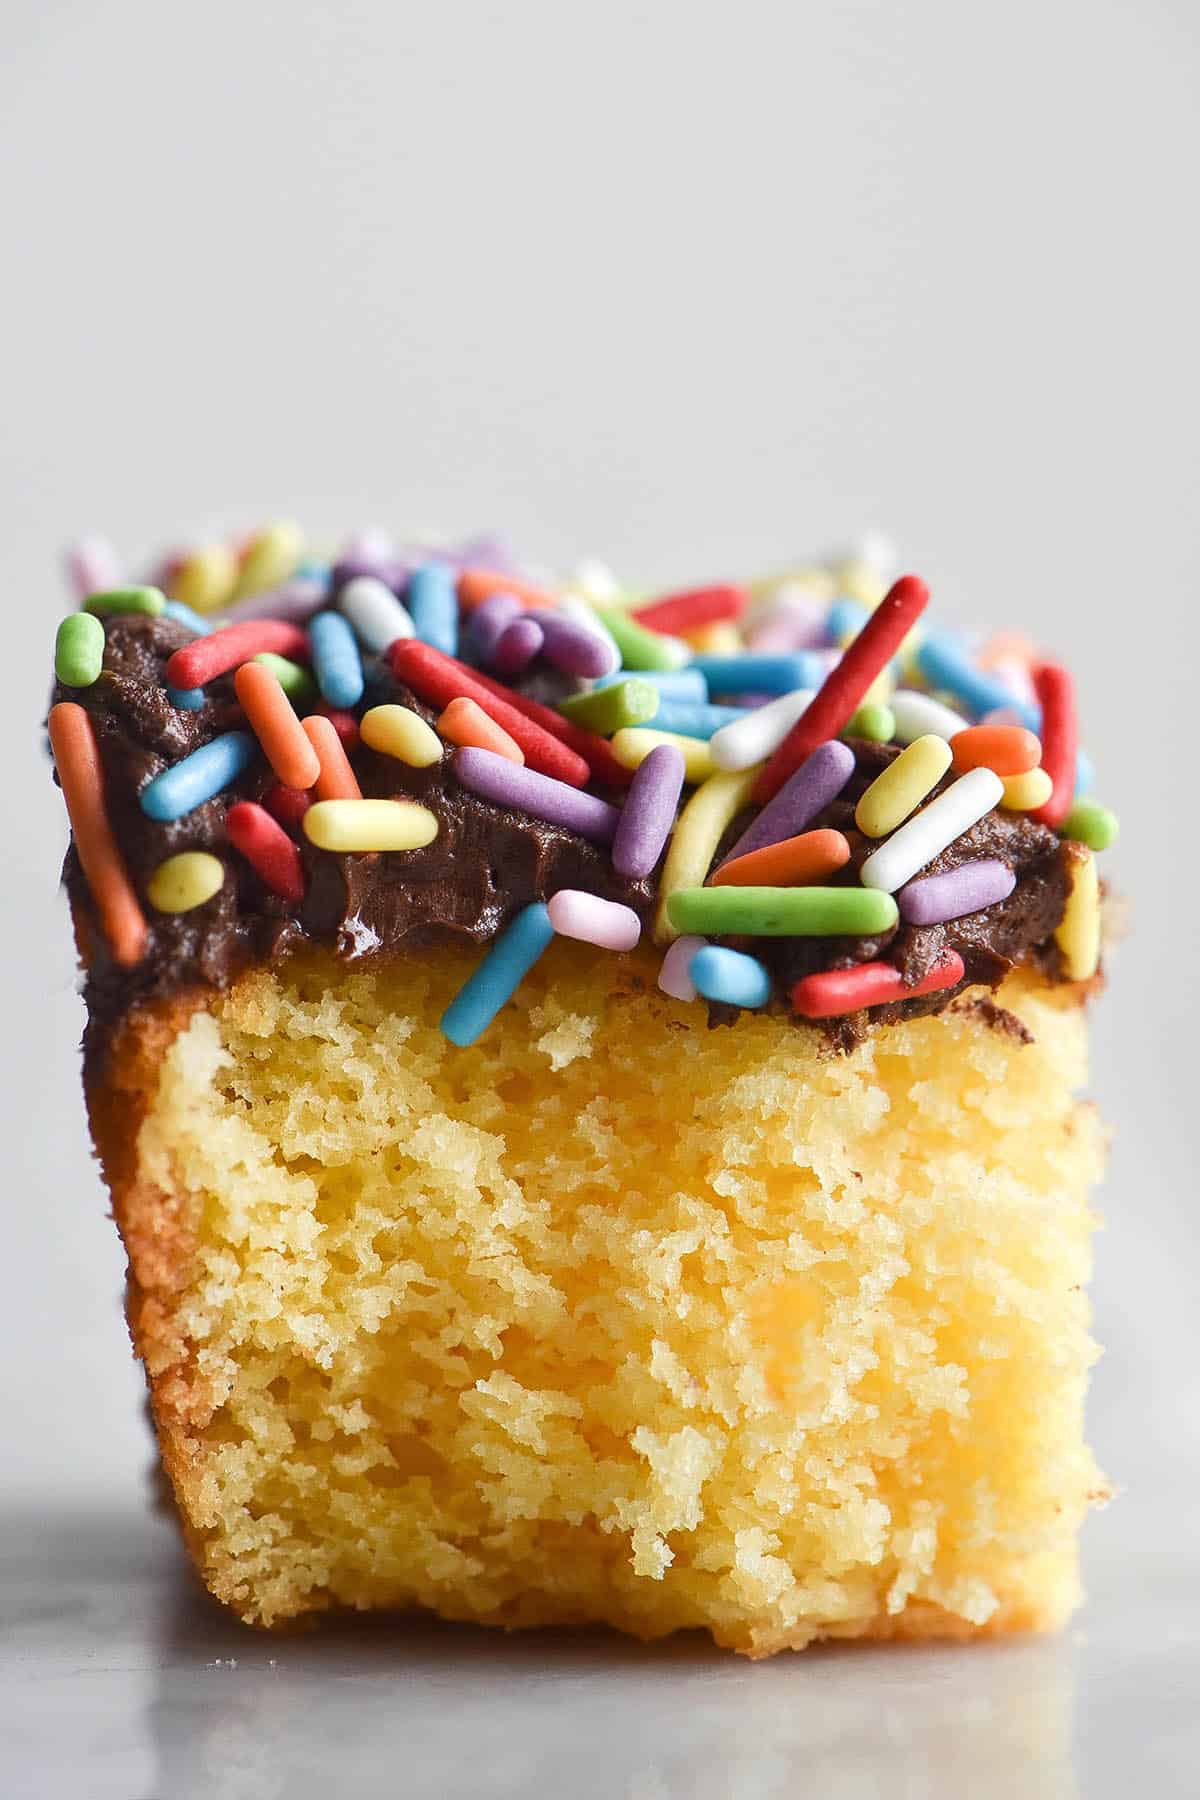 A side on macro image of a slice of gluten free birthday cake topped with chocolate buttercream and sprinkles. The cake sits on a white marble table against a white backdrop